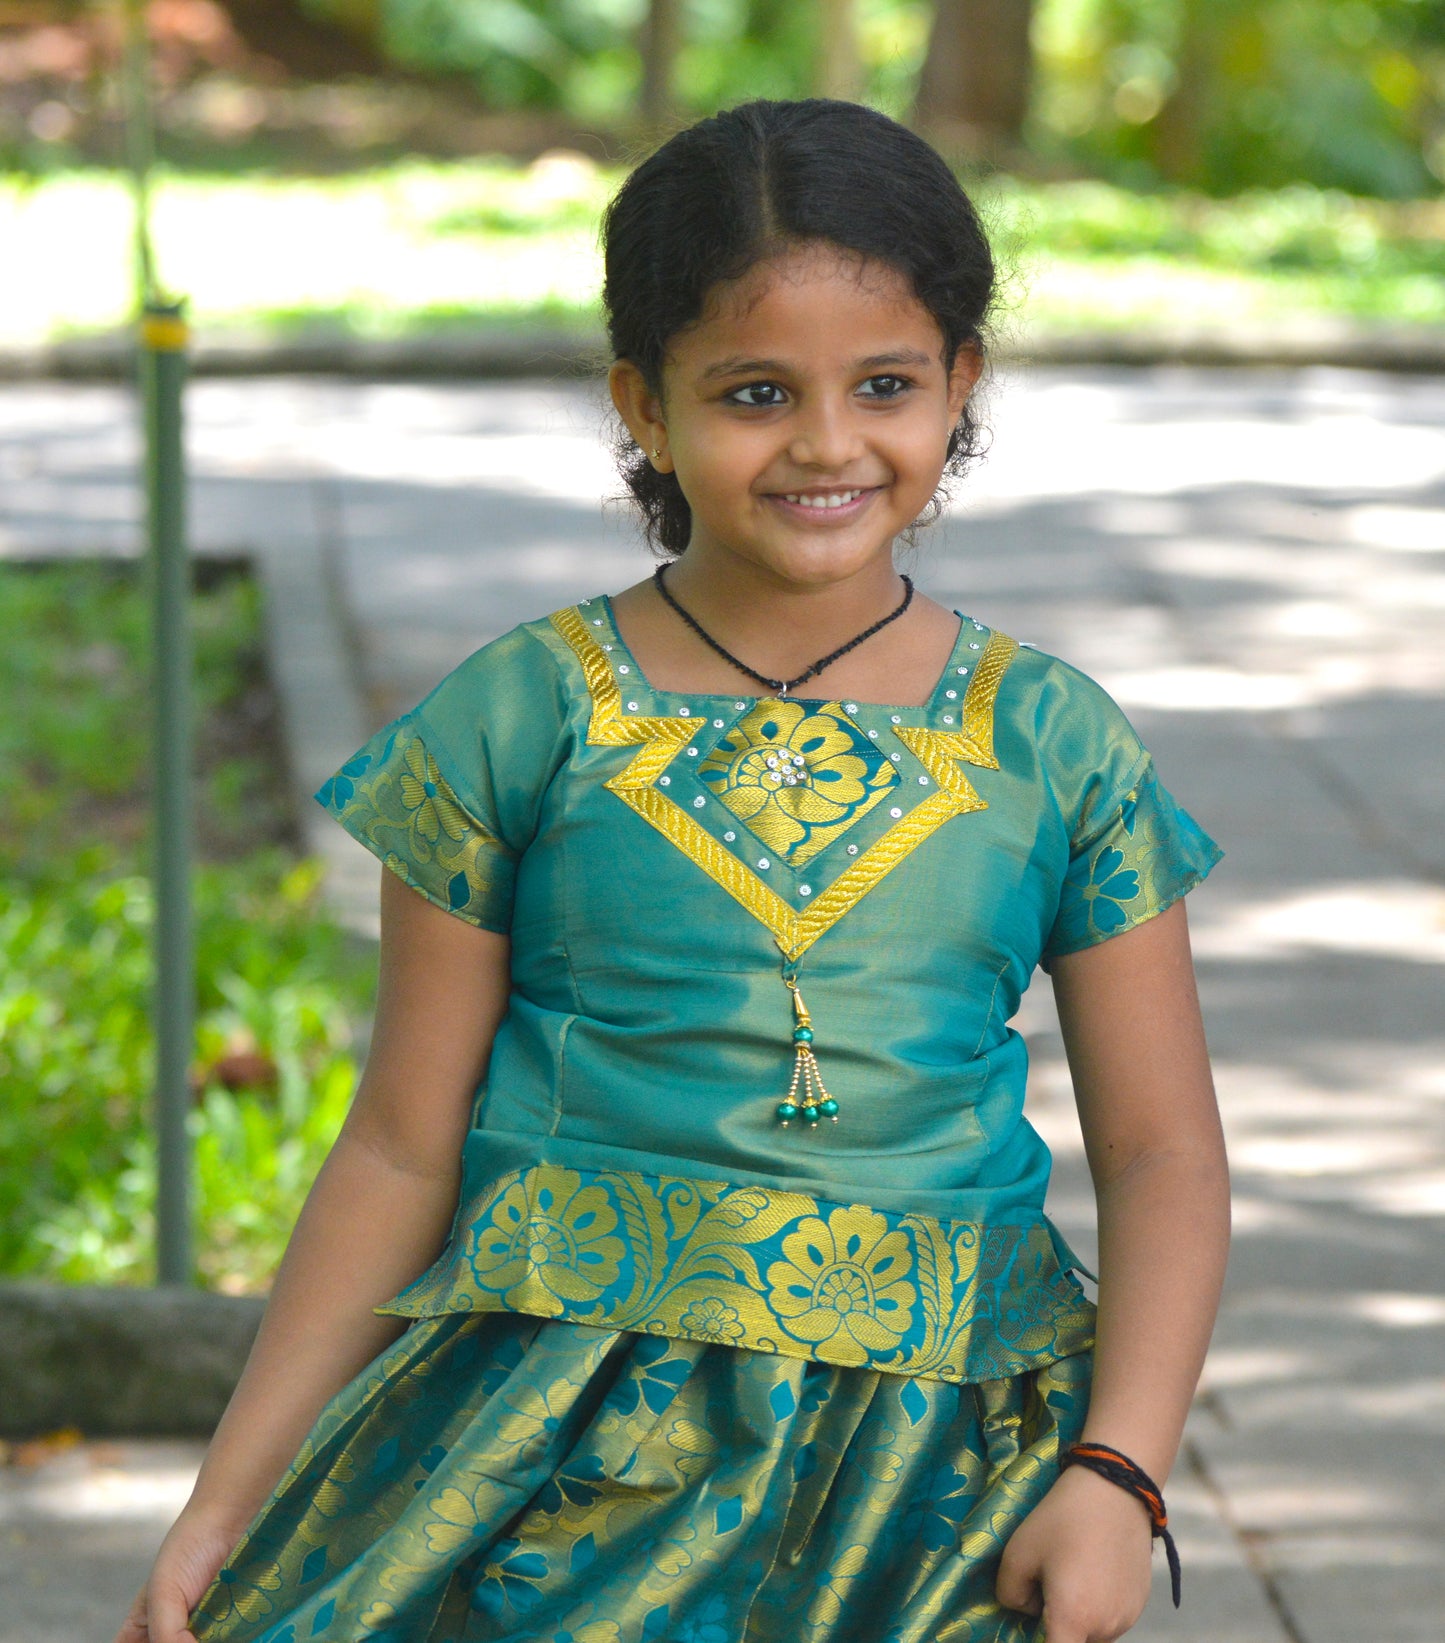 Southloom Dark Green Pattupavada and Blouse (Traditional Ethnic Skirt and Blouse for Girls)